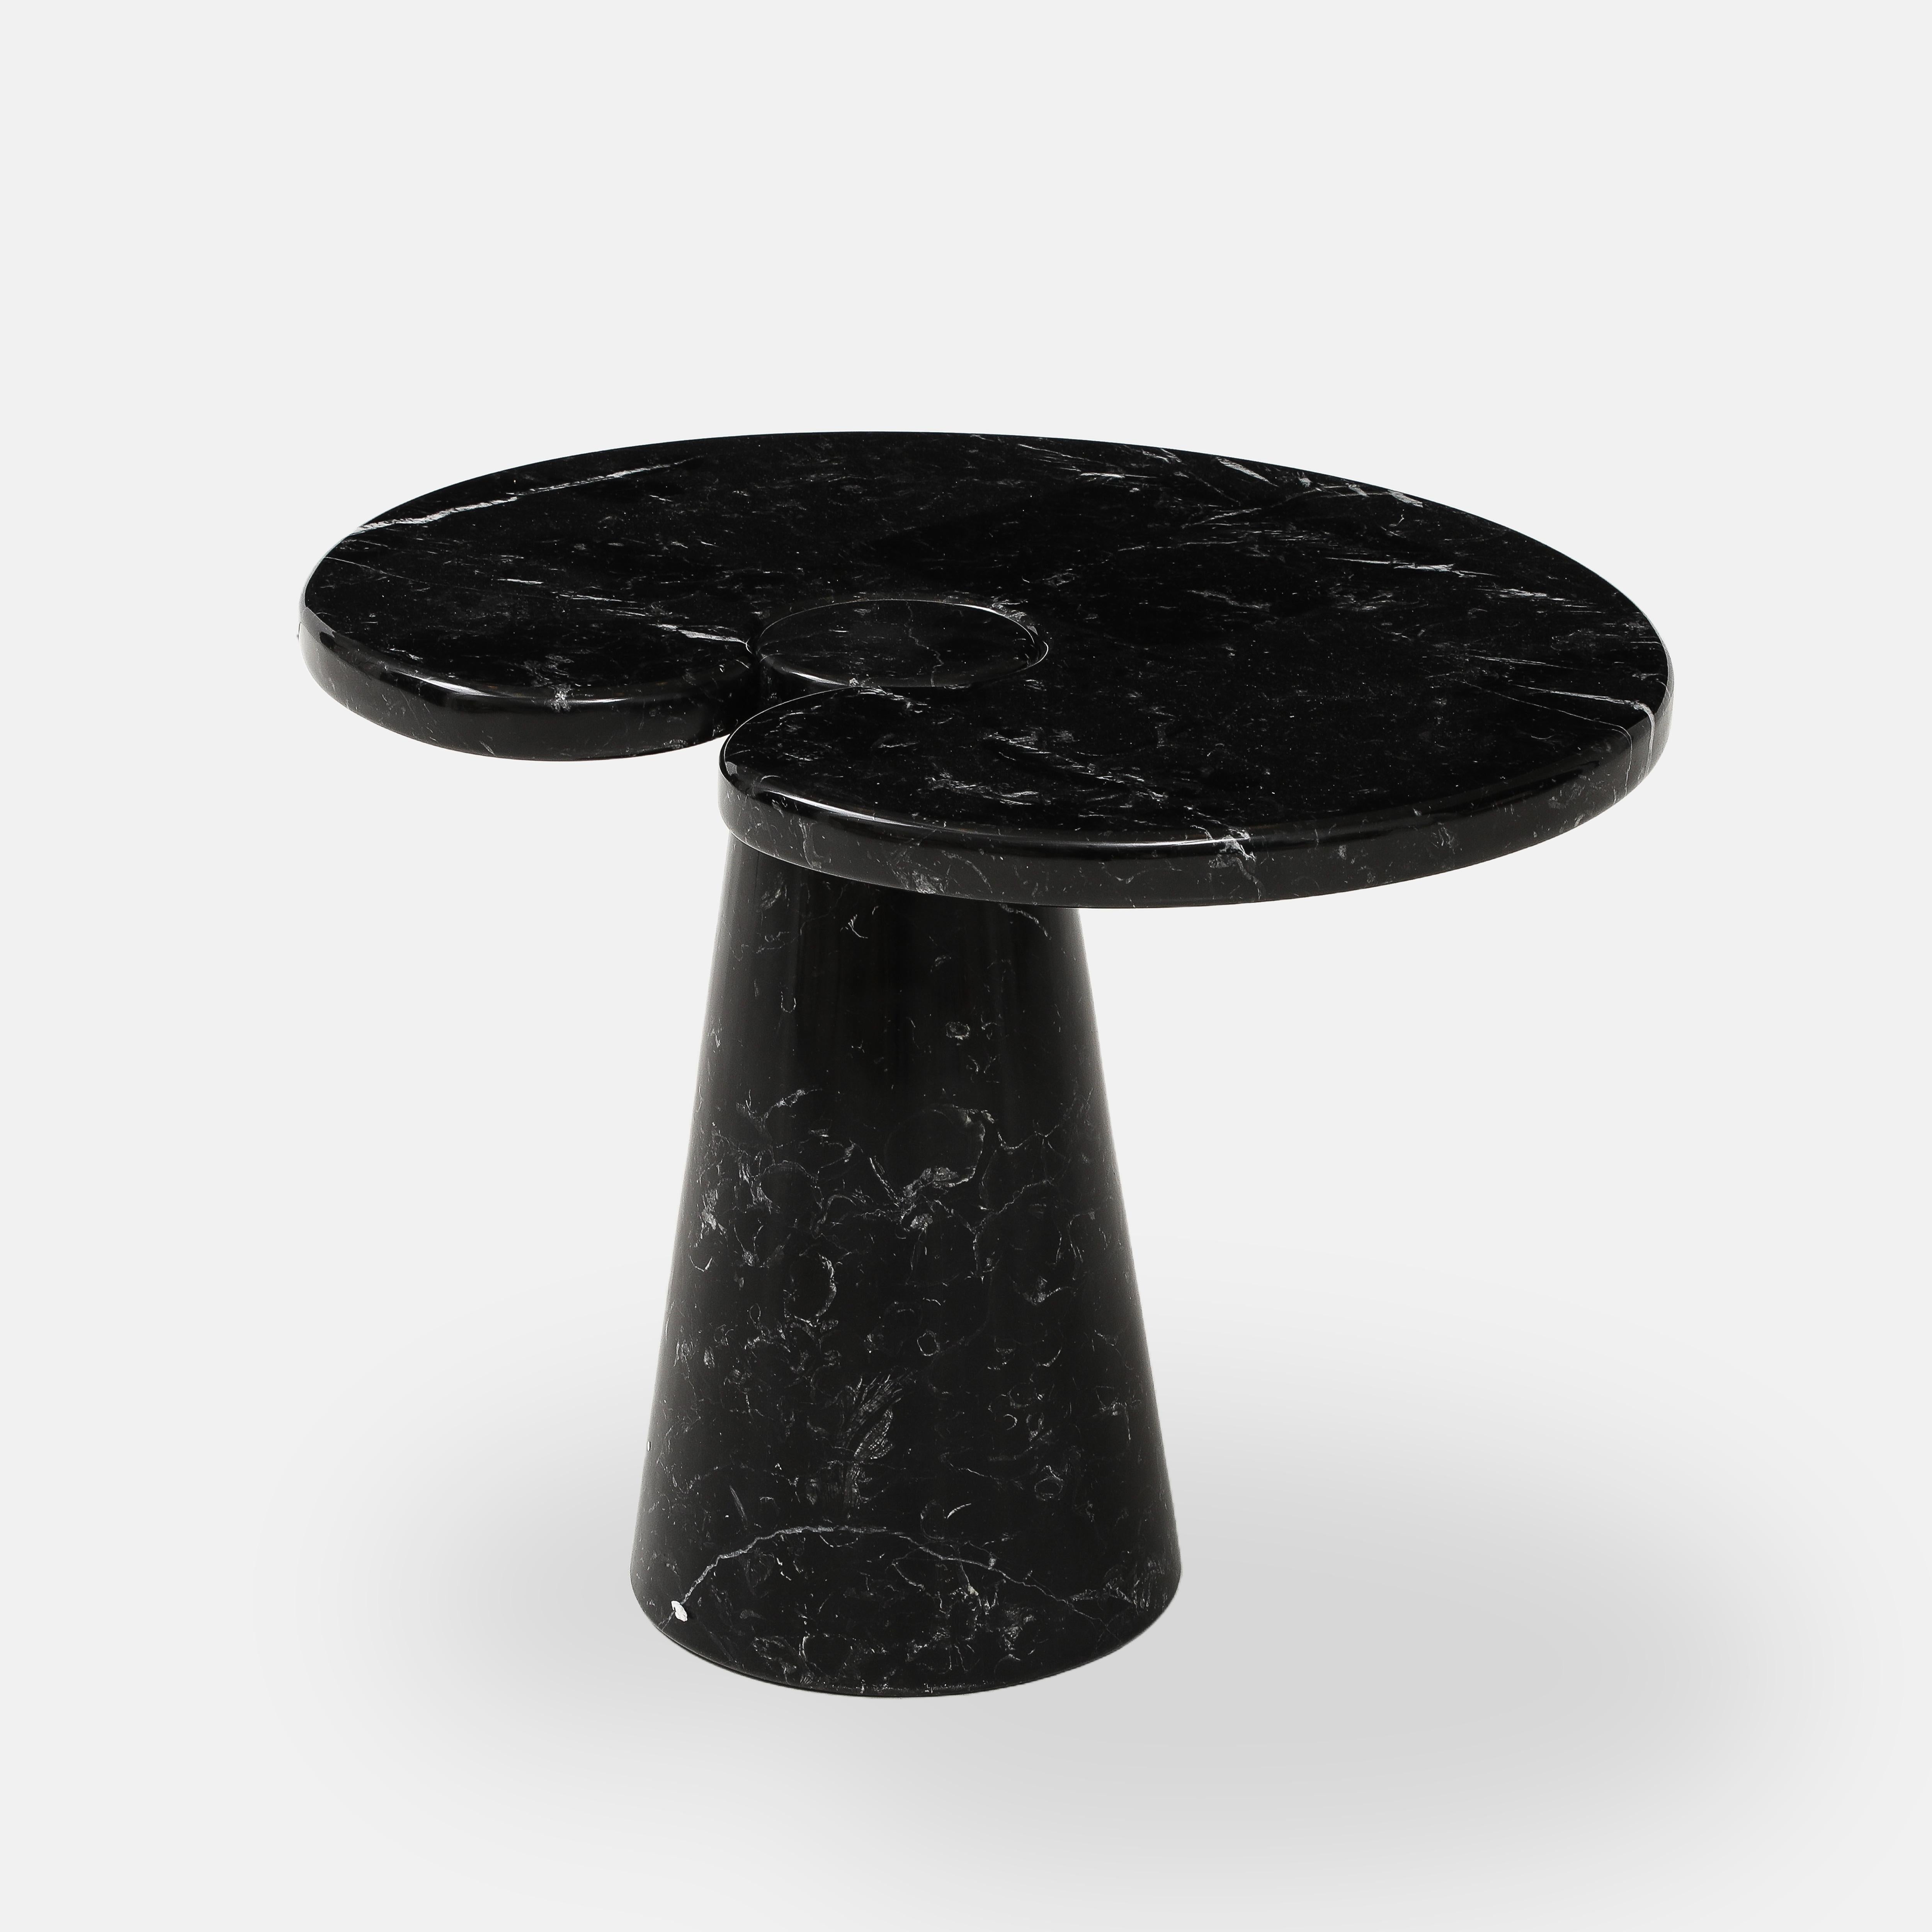 Polished Angelo Mangiarotti Nero Marquina Marble Side Table from 'Eros' Series, 1971 For Sale